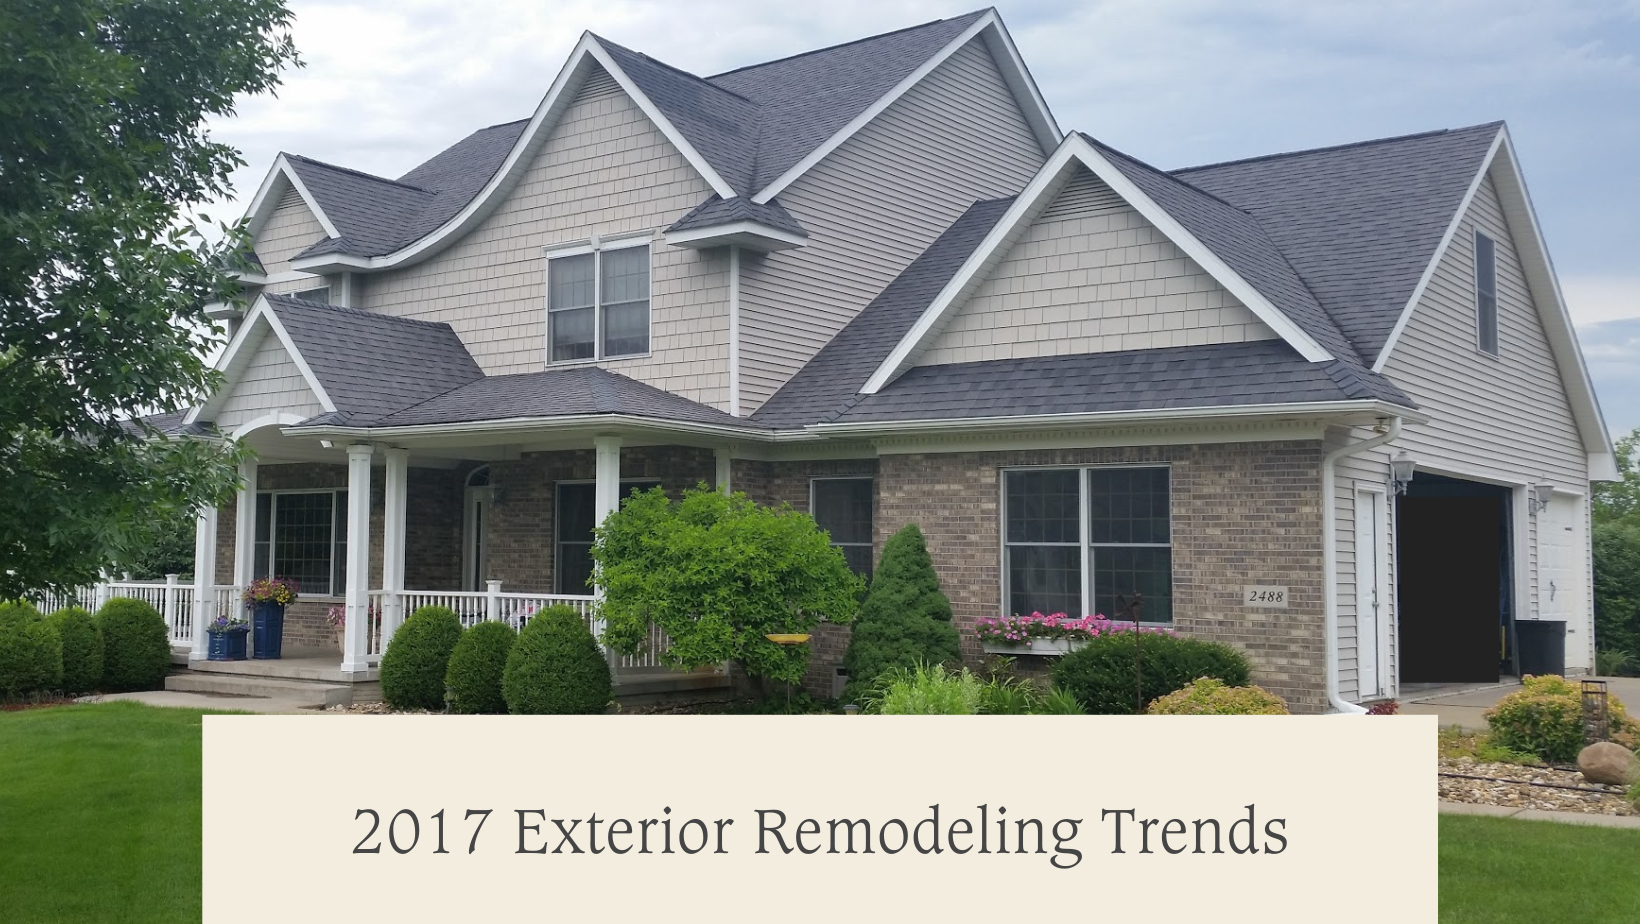 2017 Exterior Remodeling Trends